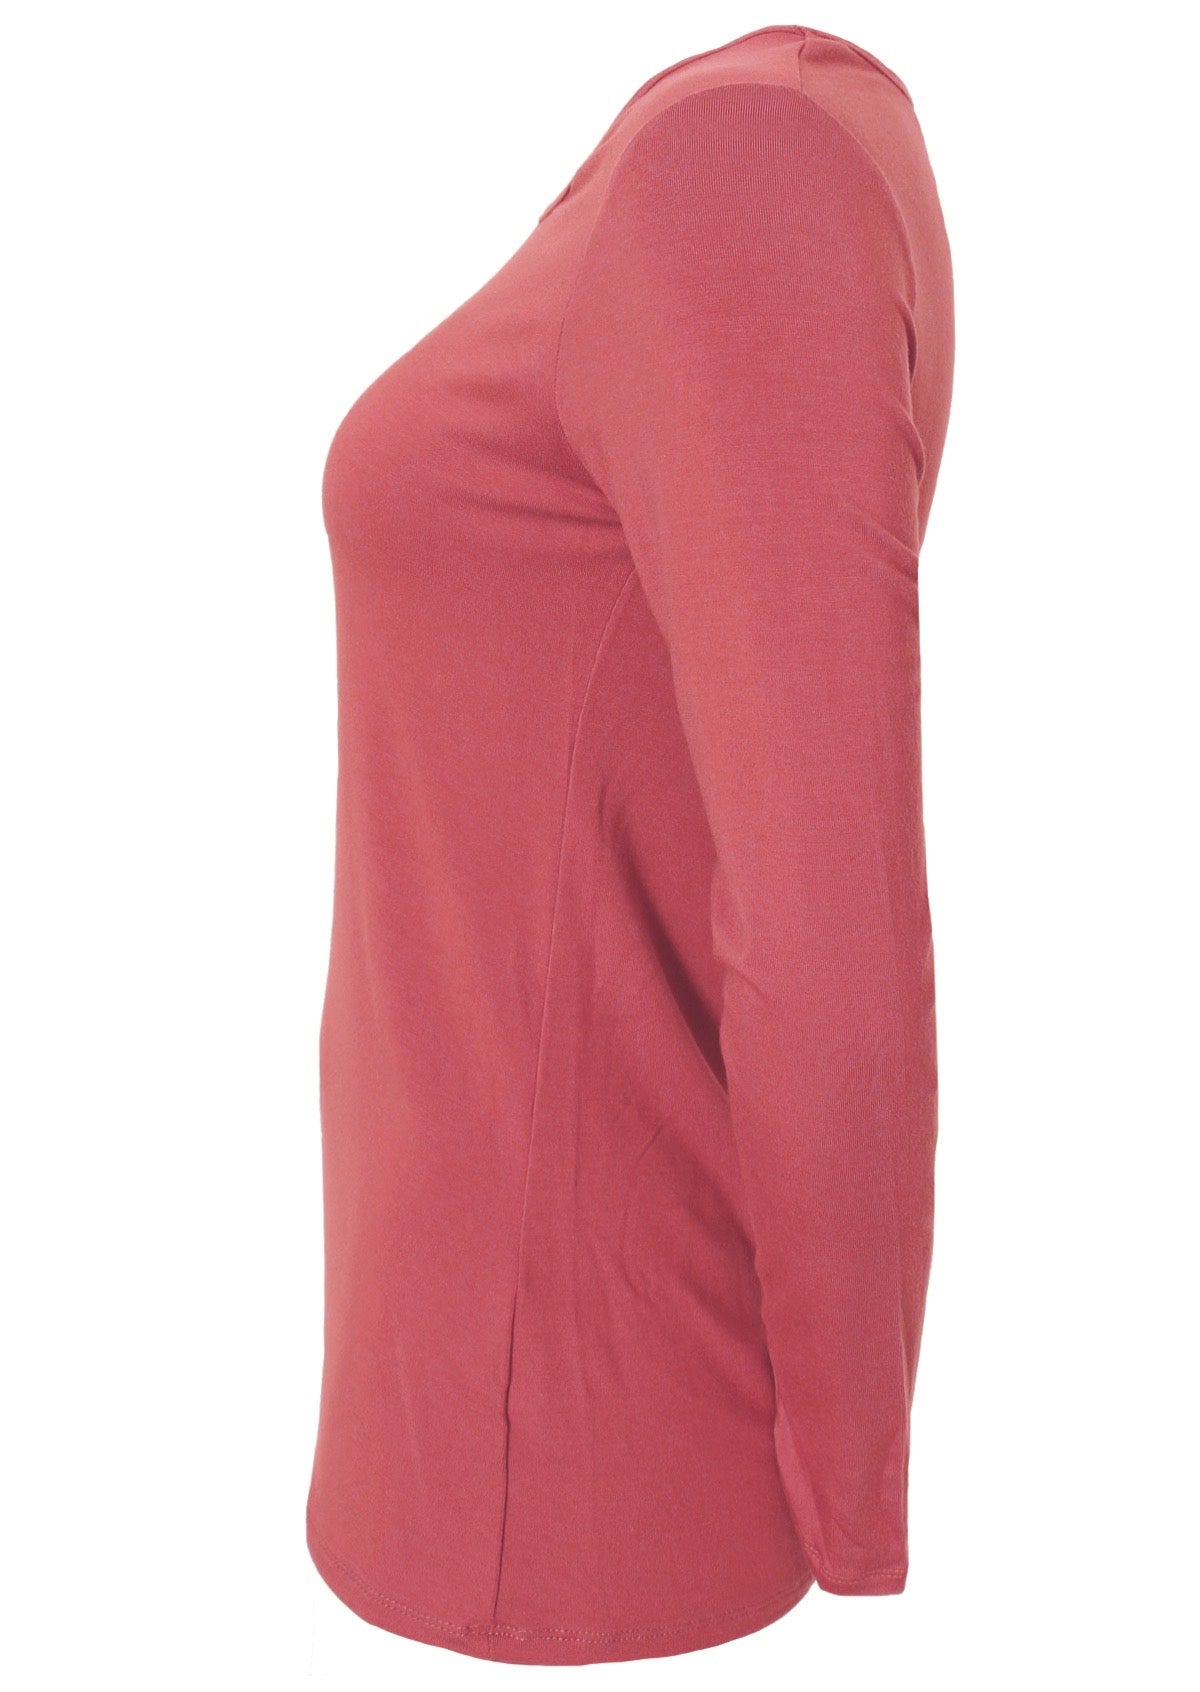 Side view of women's round neck pink long sleeve rayon top.